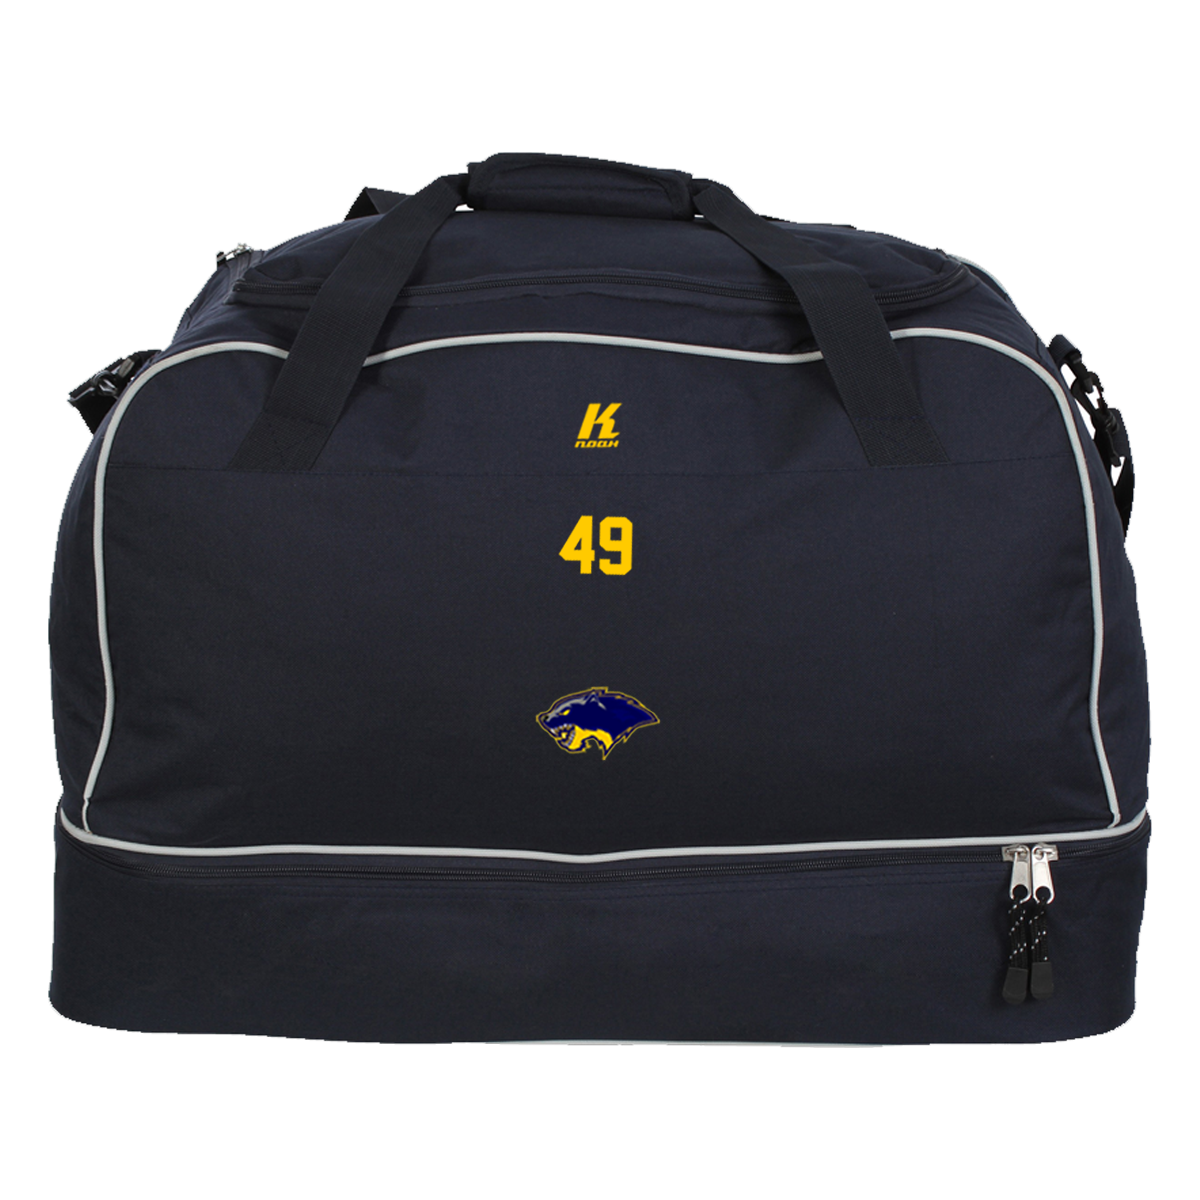 Wolverines Players CT Bag with Playernumber or Initials